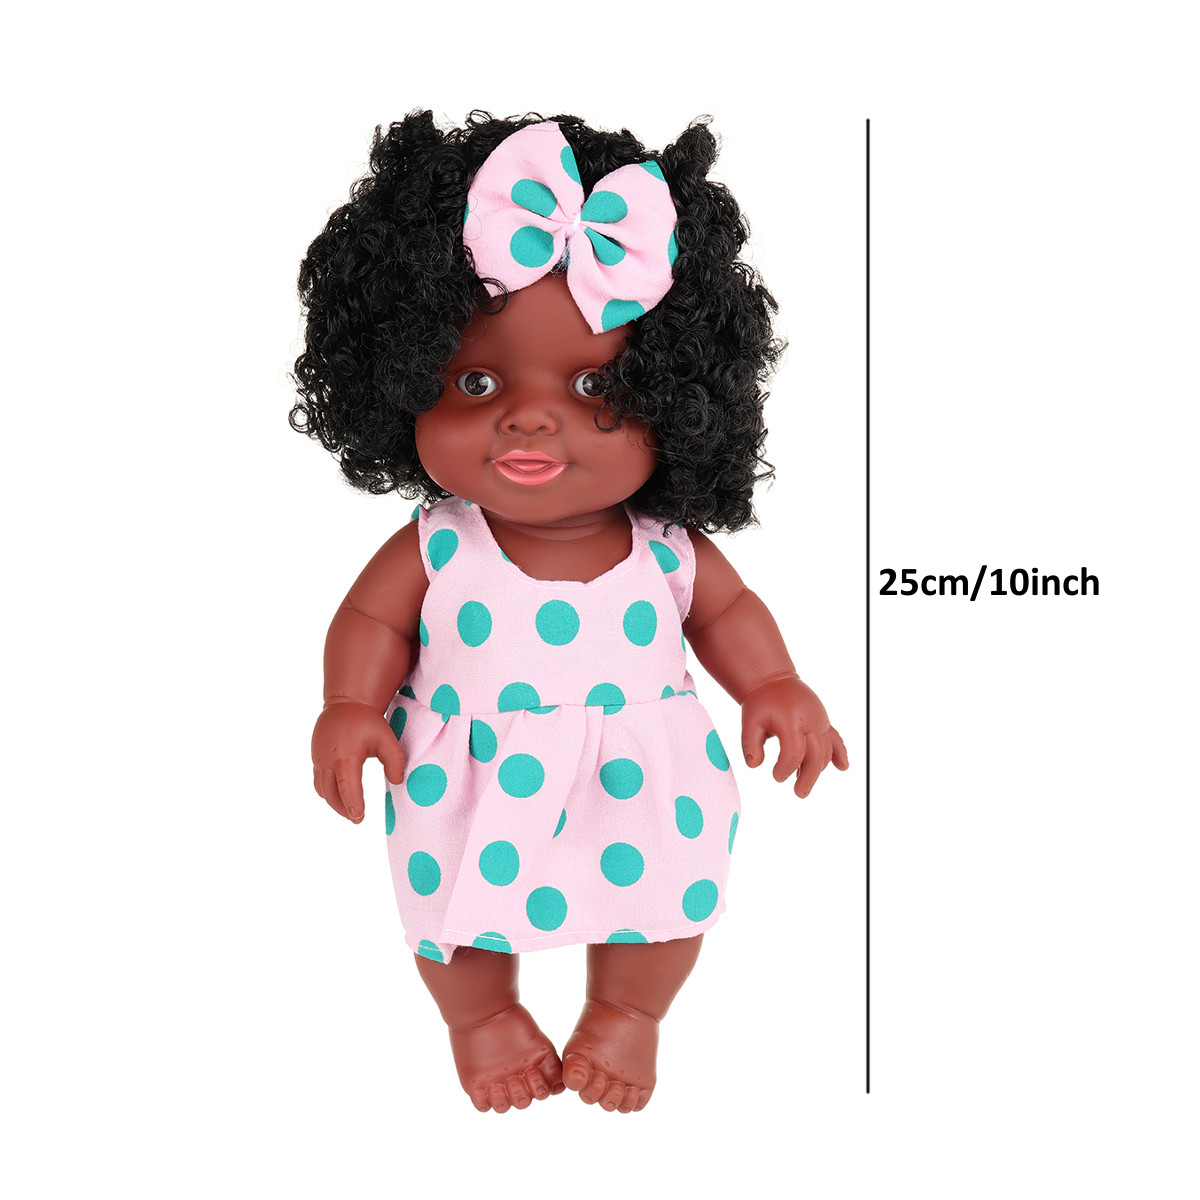 25CM-Cute-Soft-Silicone-Joint-Movable-Lifelike-Realistic-African-Black-Reborn-Baby-Doll-for-Kids-Gif-1733542-10